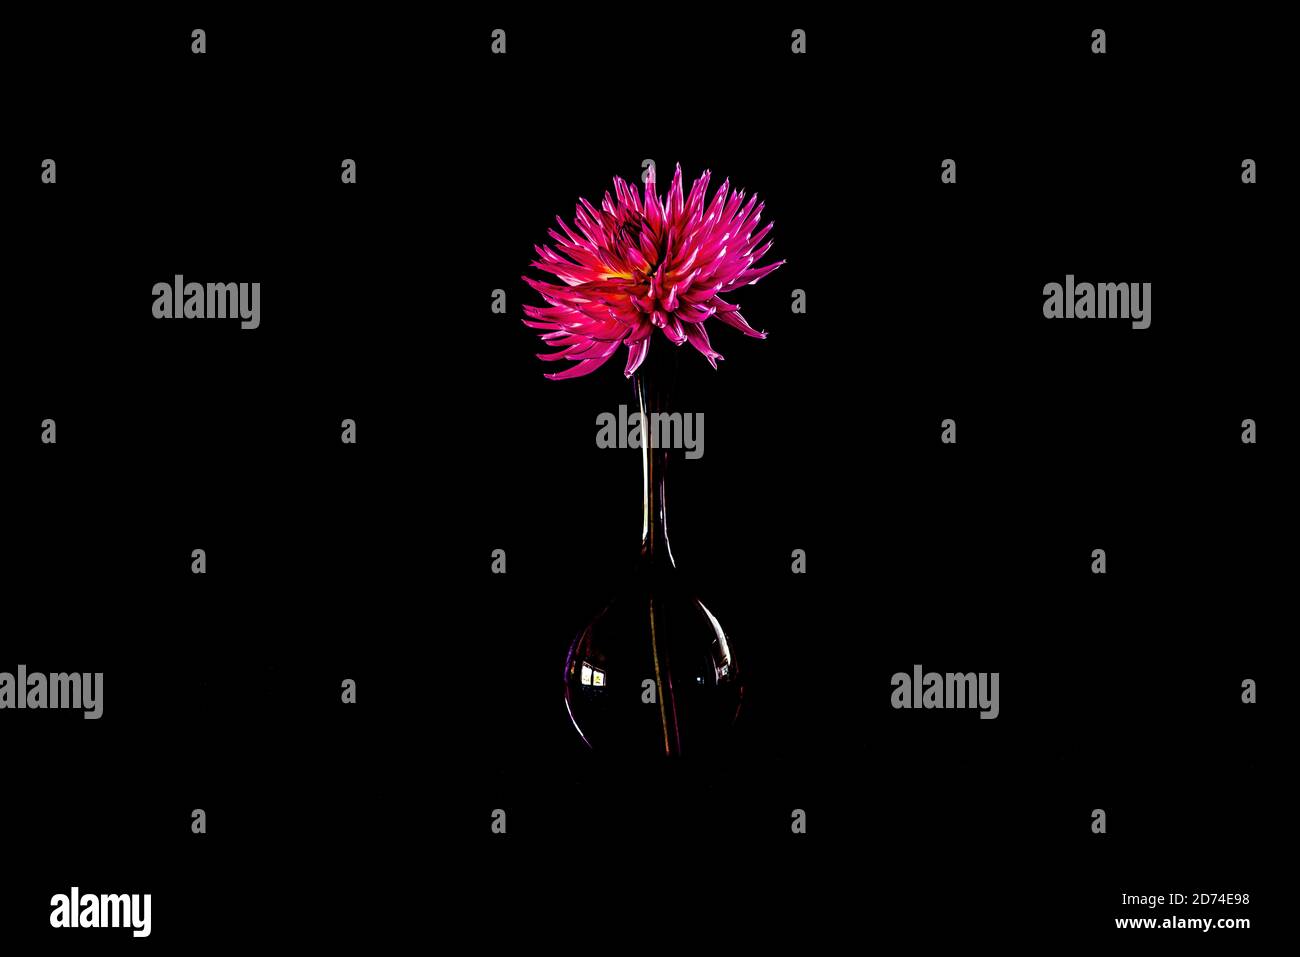 The beautiful Dahlia Lady Lapita in an elegant mauve coloured glass vase as a still life with black background Stock Photo